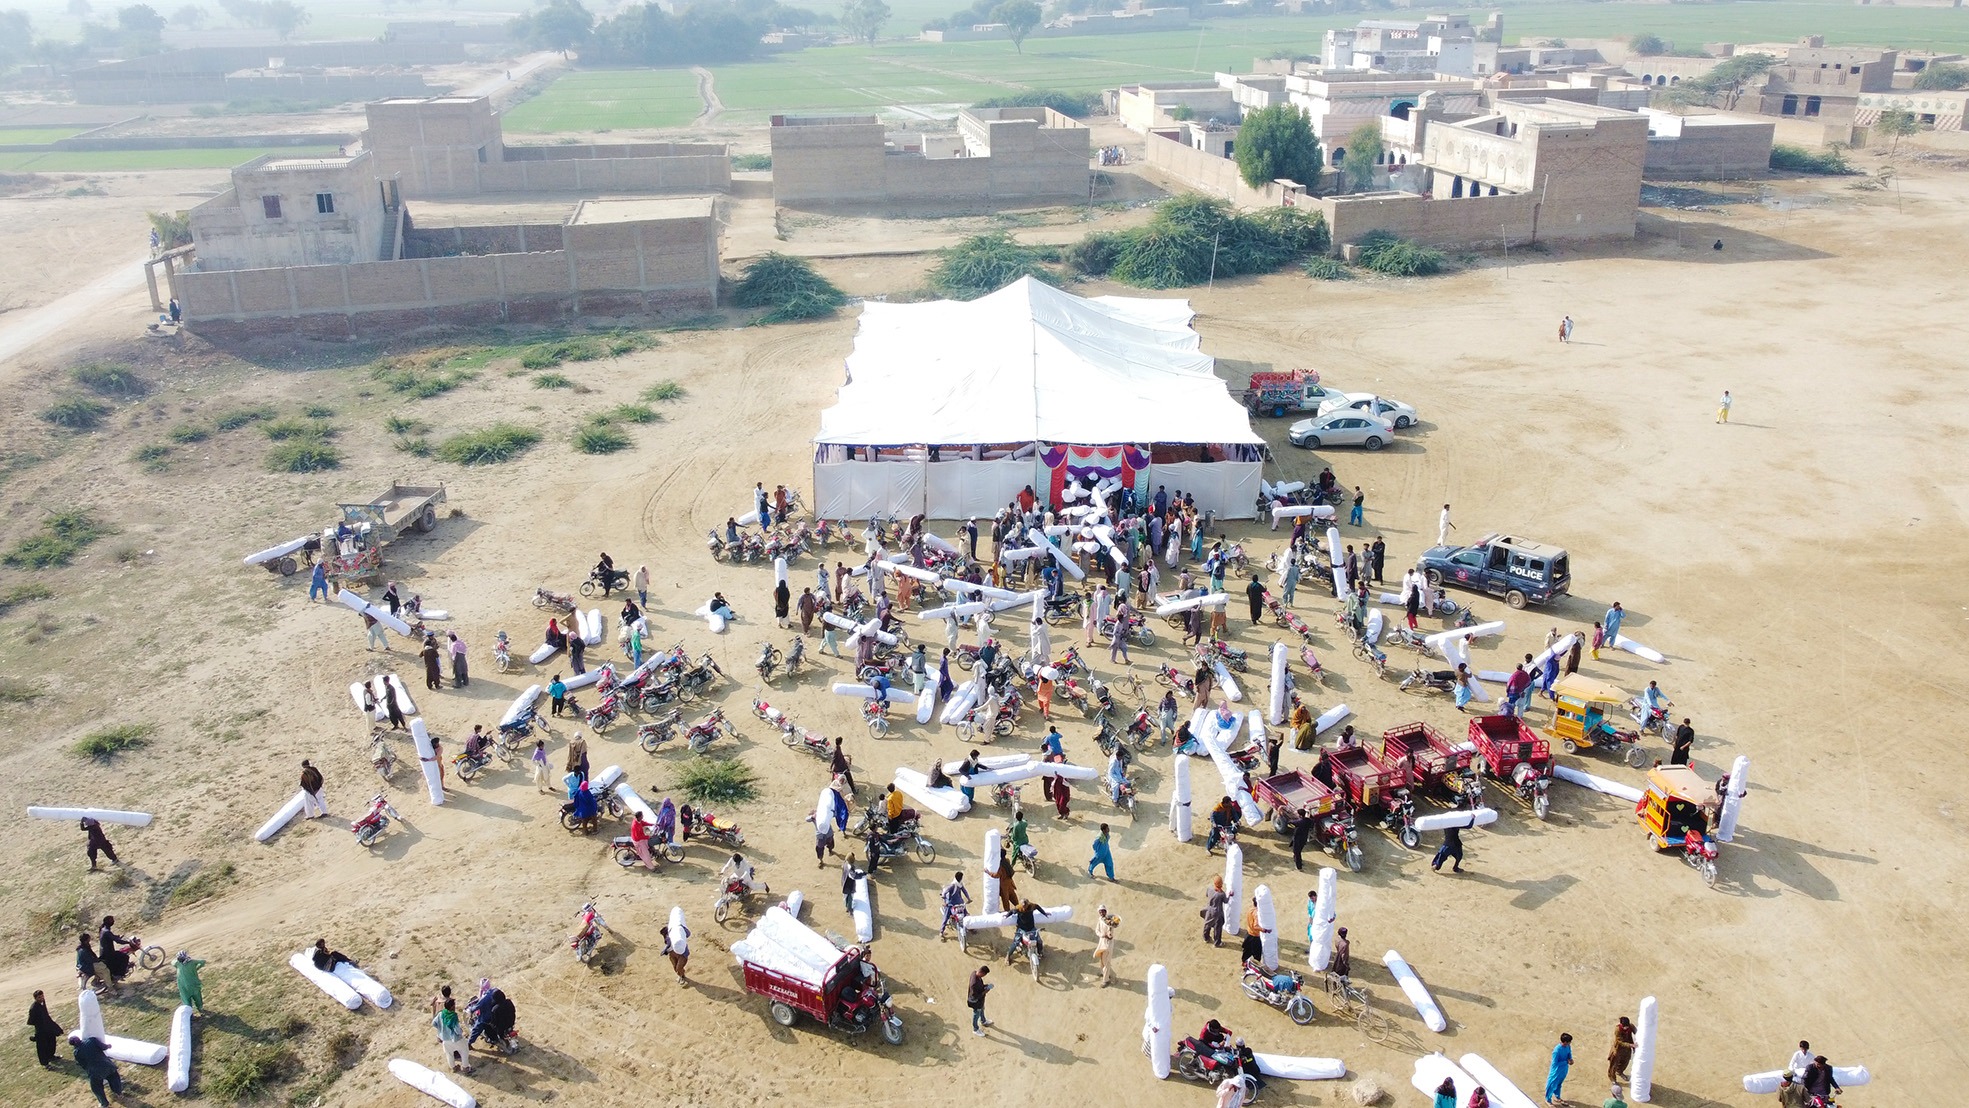 Qatar Charity Continues to Assist Those Affected by Floods in Pakistan